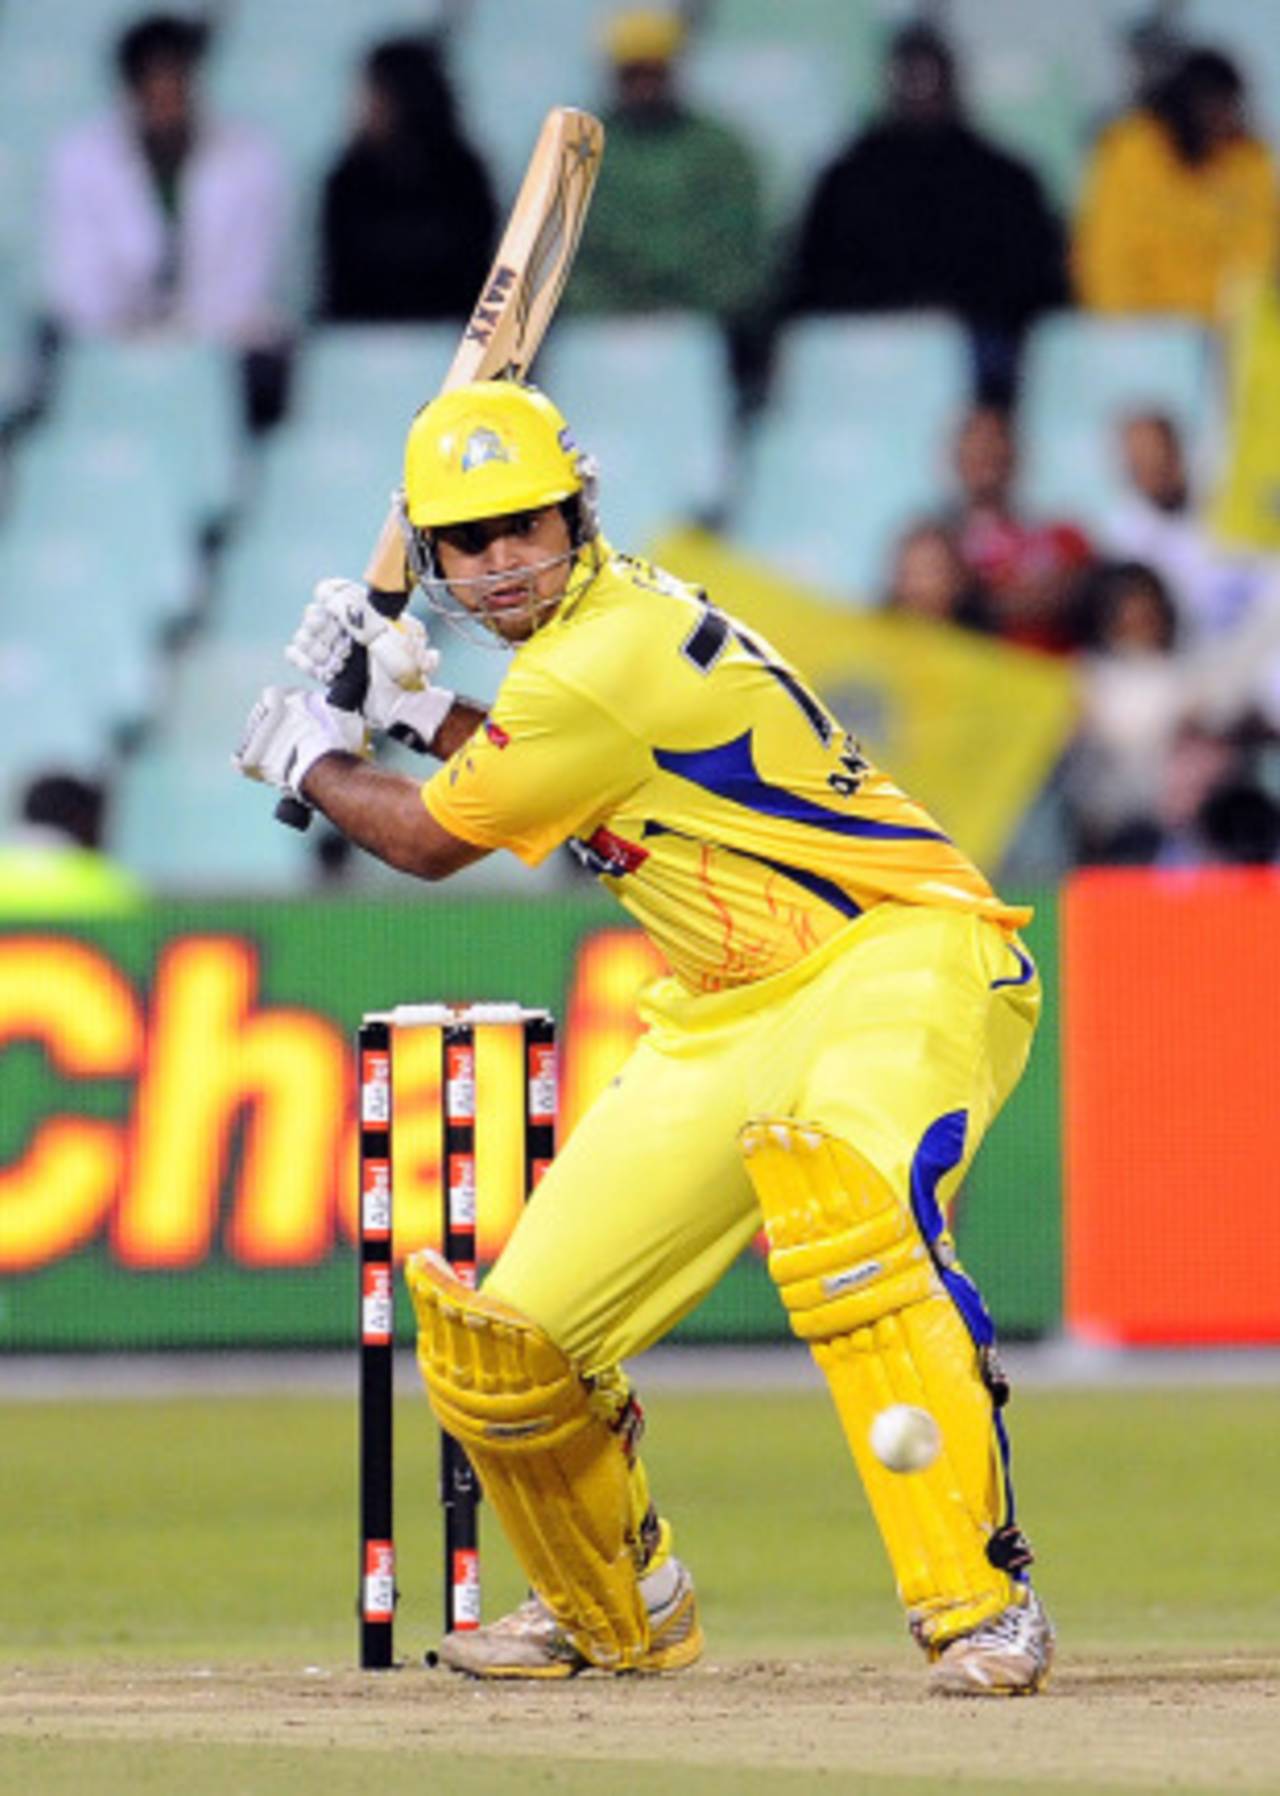 Srikkanth Anirudha lines up to play a stroke, Central Districts v Chennai Super Kings, Champions League Twenty20, Durban, September 11, 2010